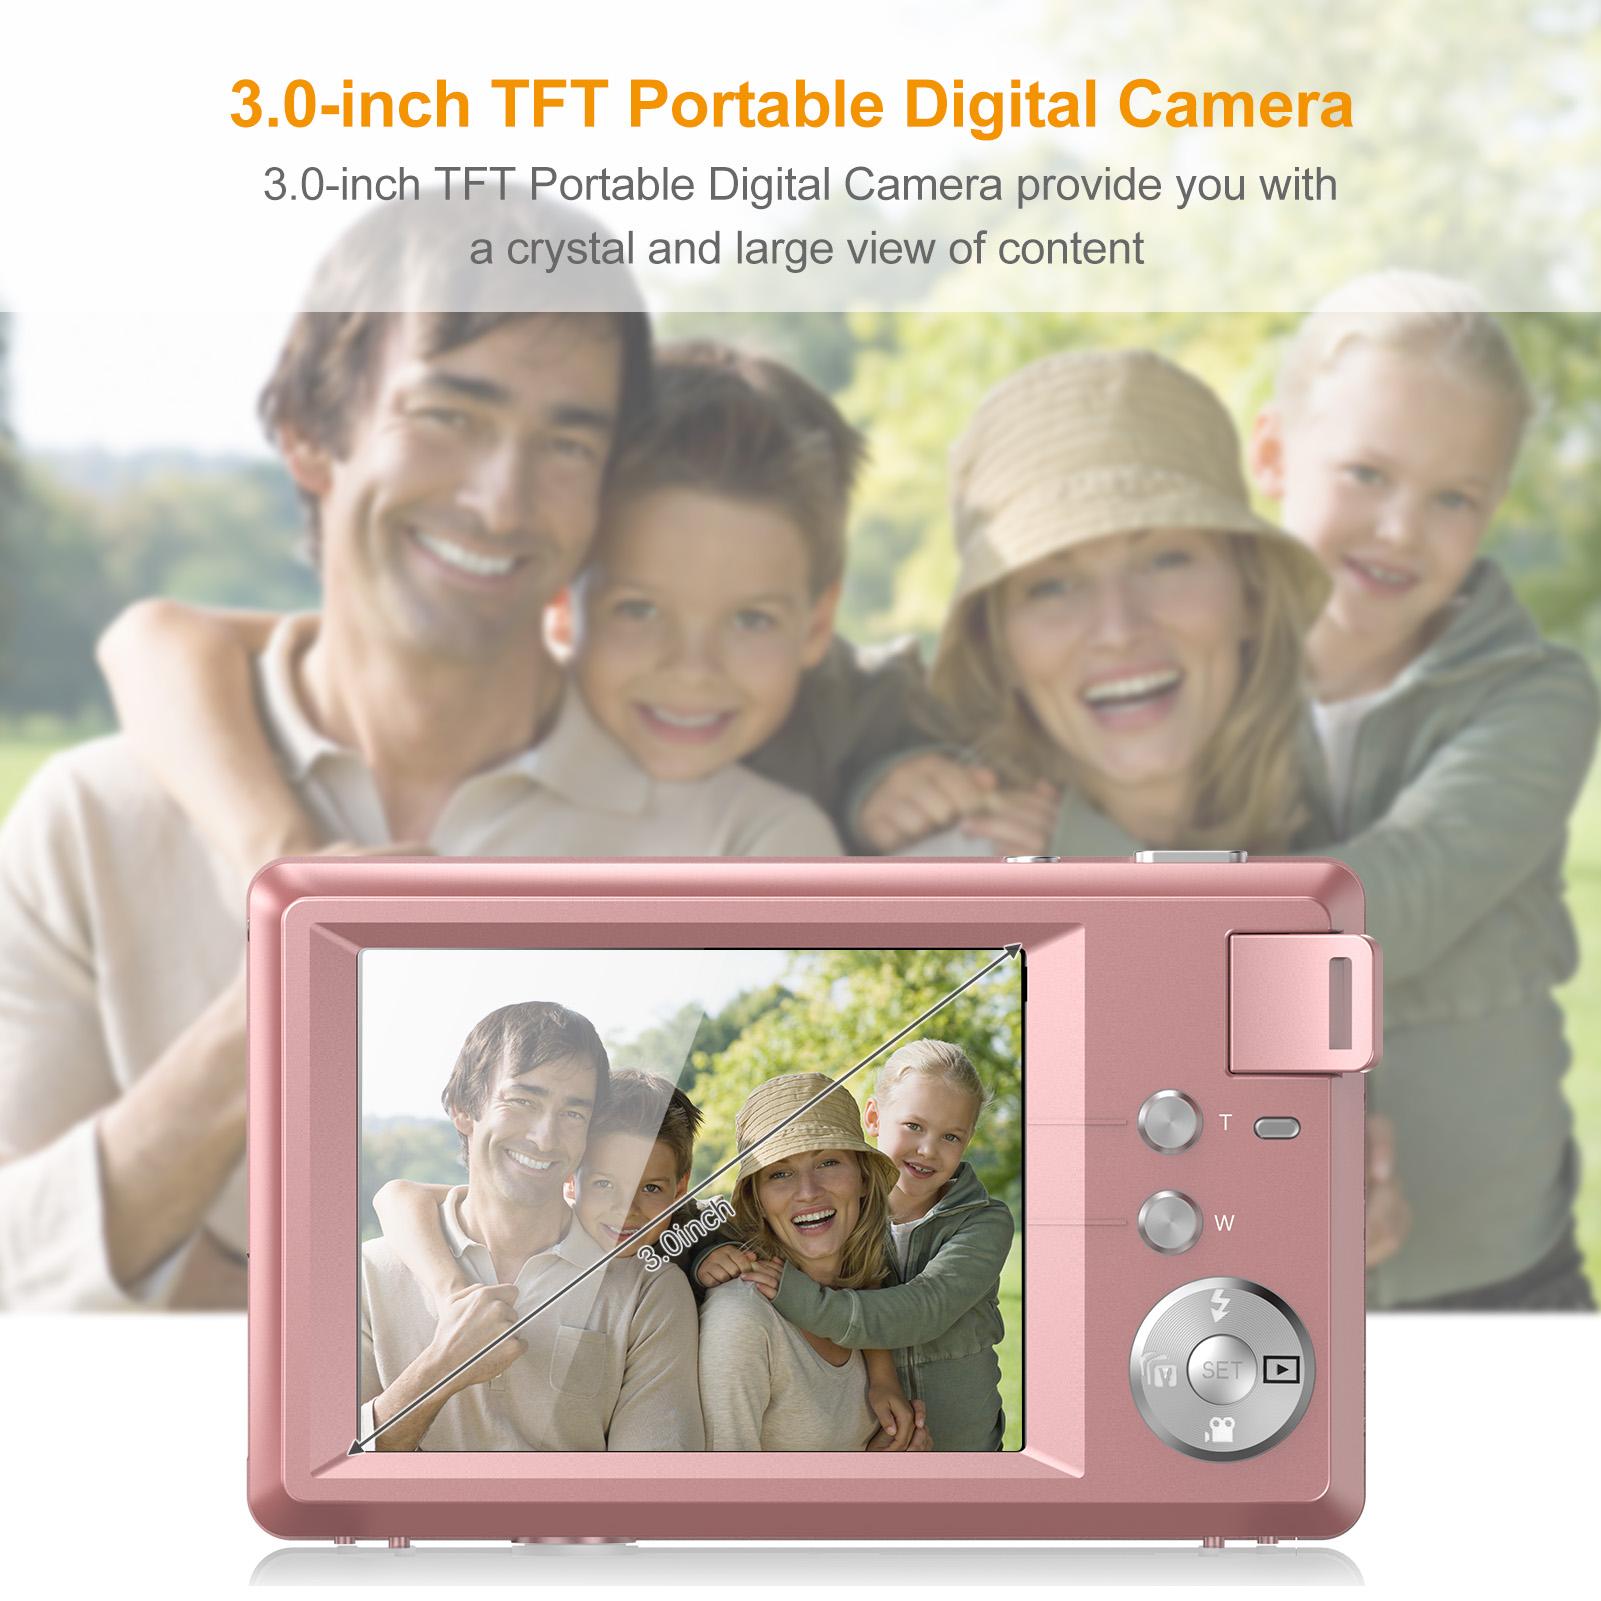 TOMTOP JMS Andoer 3.0-inch TFT Portable Digital Camera 48MP 4K Ultra HD 16X Zoom Auto Focus Self-Timer Face